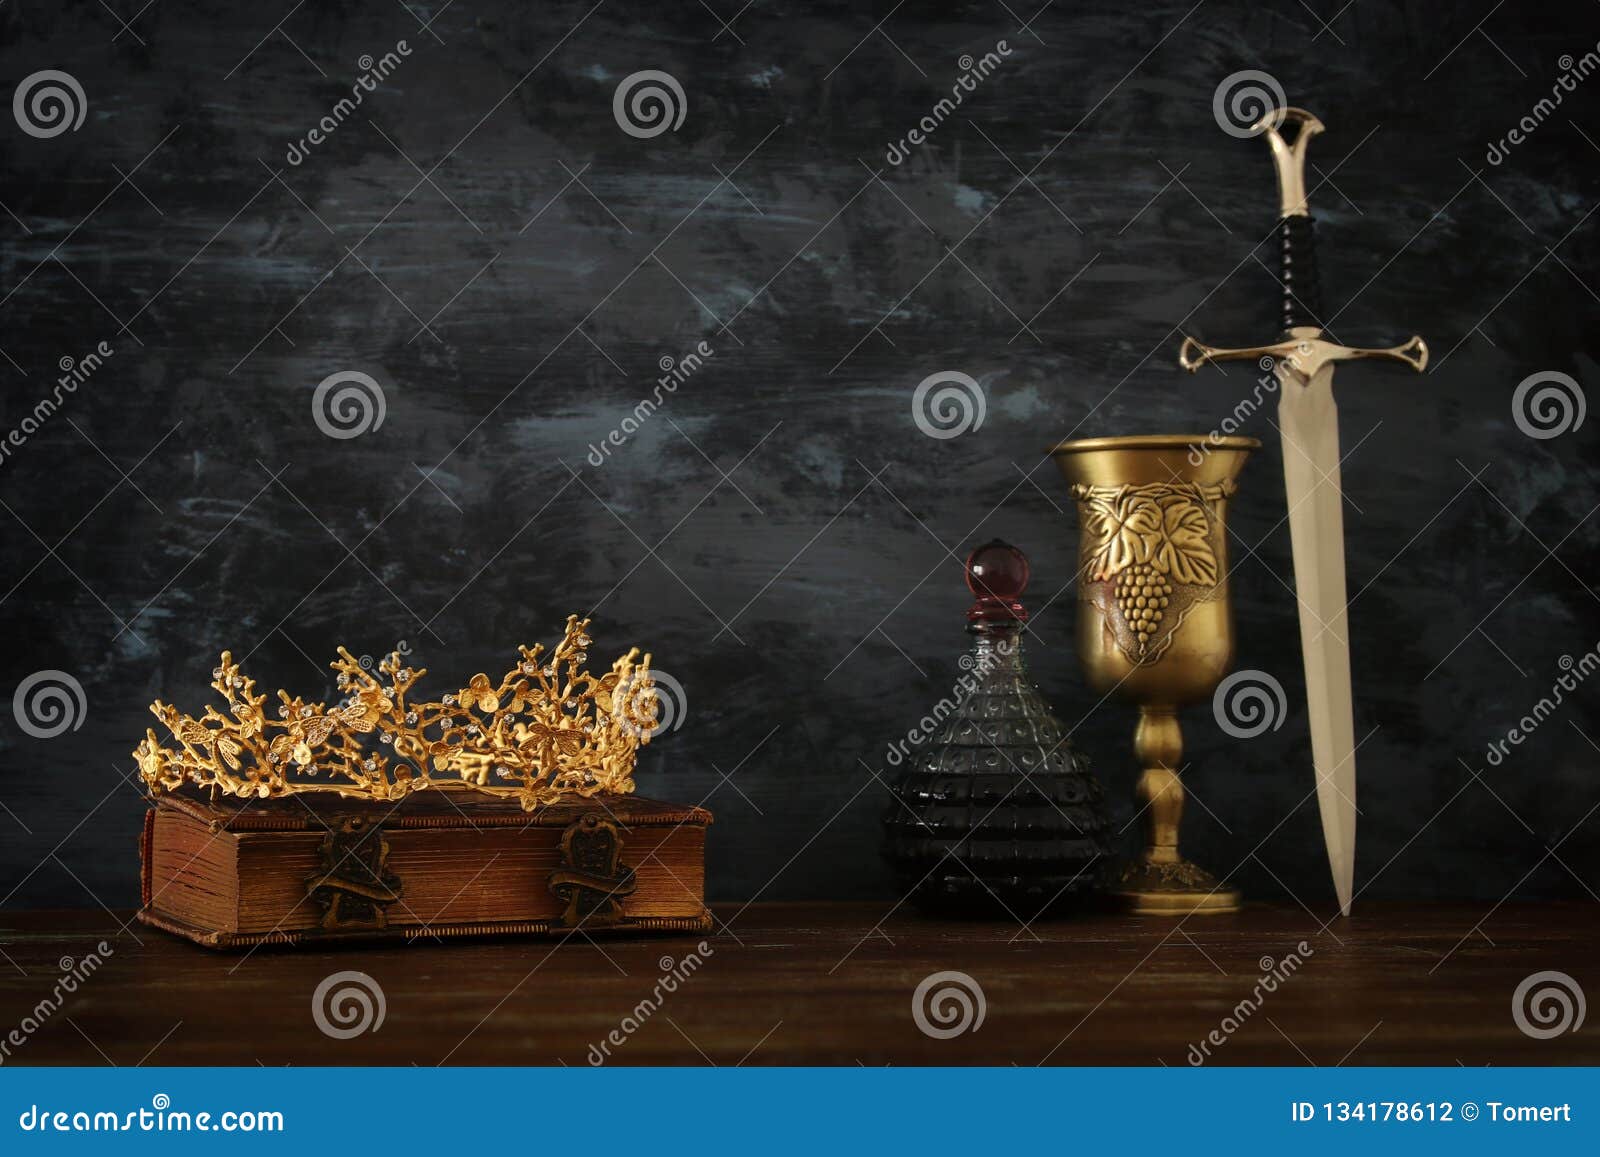 Low Key Image of Beautiful Queen/king Crown, Wine Cup and Sword